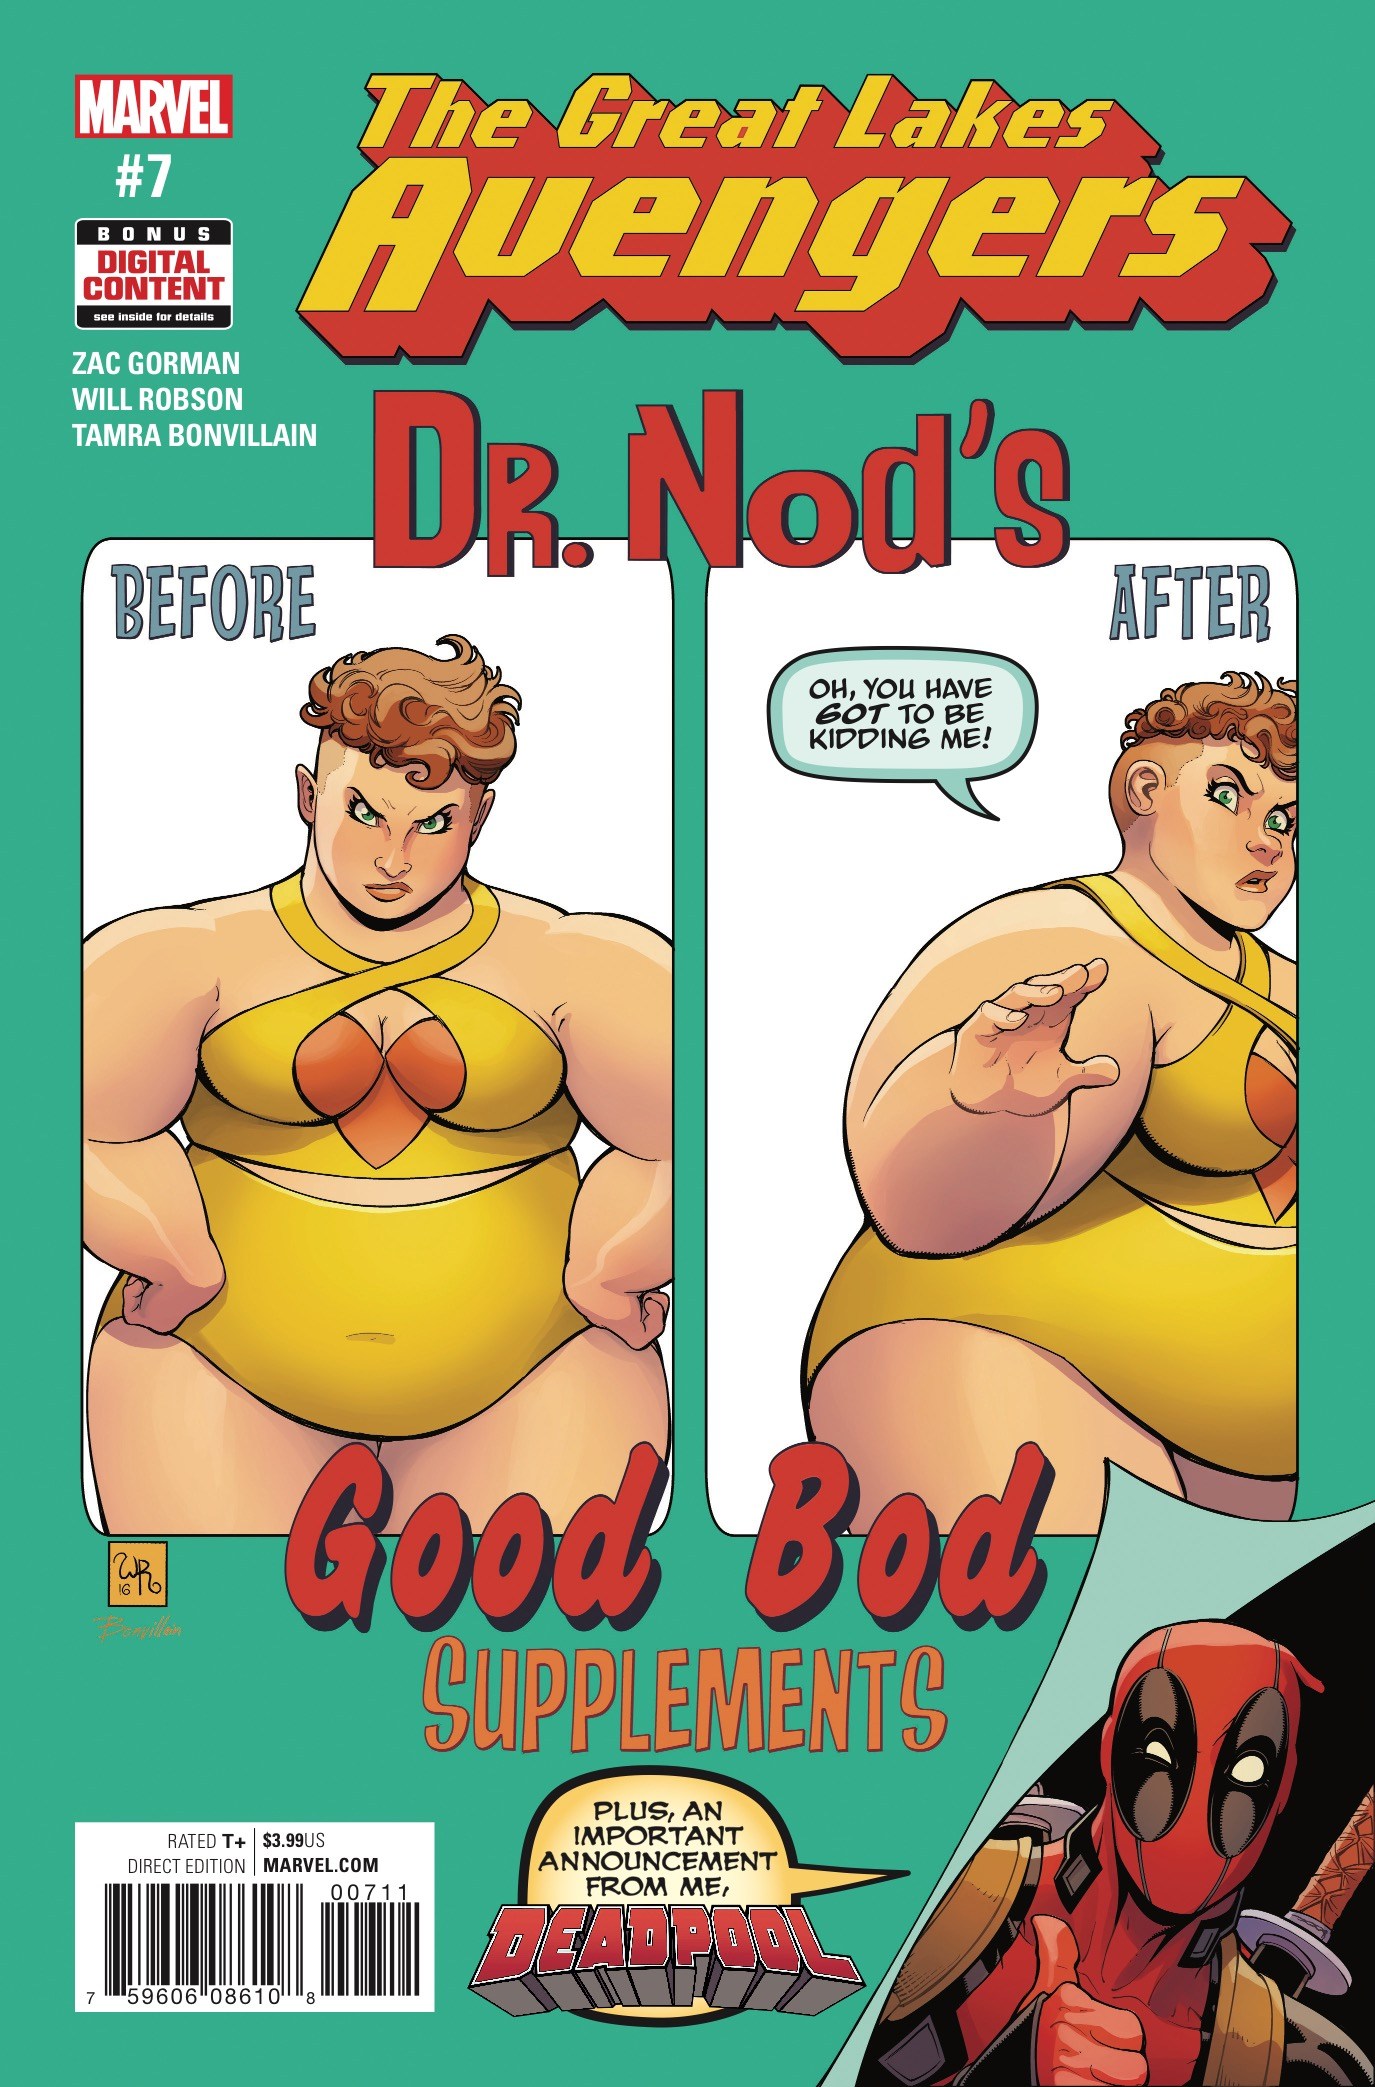 Great Lakes Avengers #7 Review